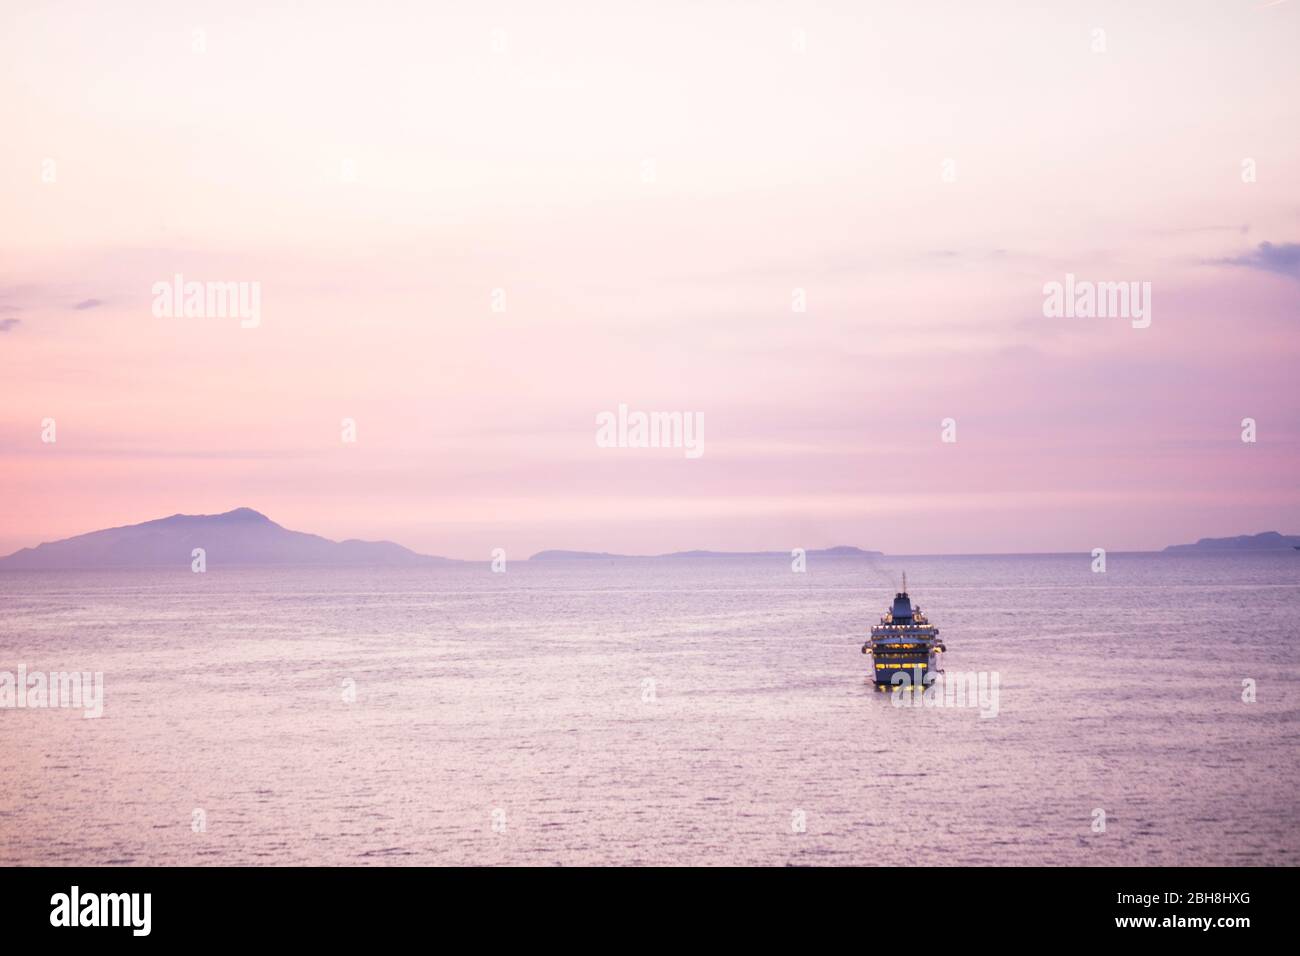 Travel and enjoy life concept with single boat in the middle of the sea with islands in background. Wanderlust with pink sunset sky coloured and people traveling away for the next adventure destination Stock Photo